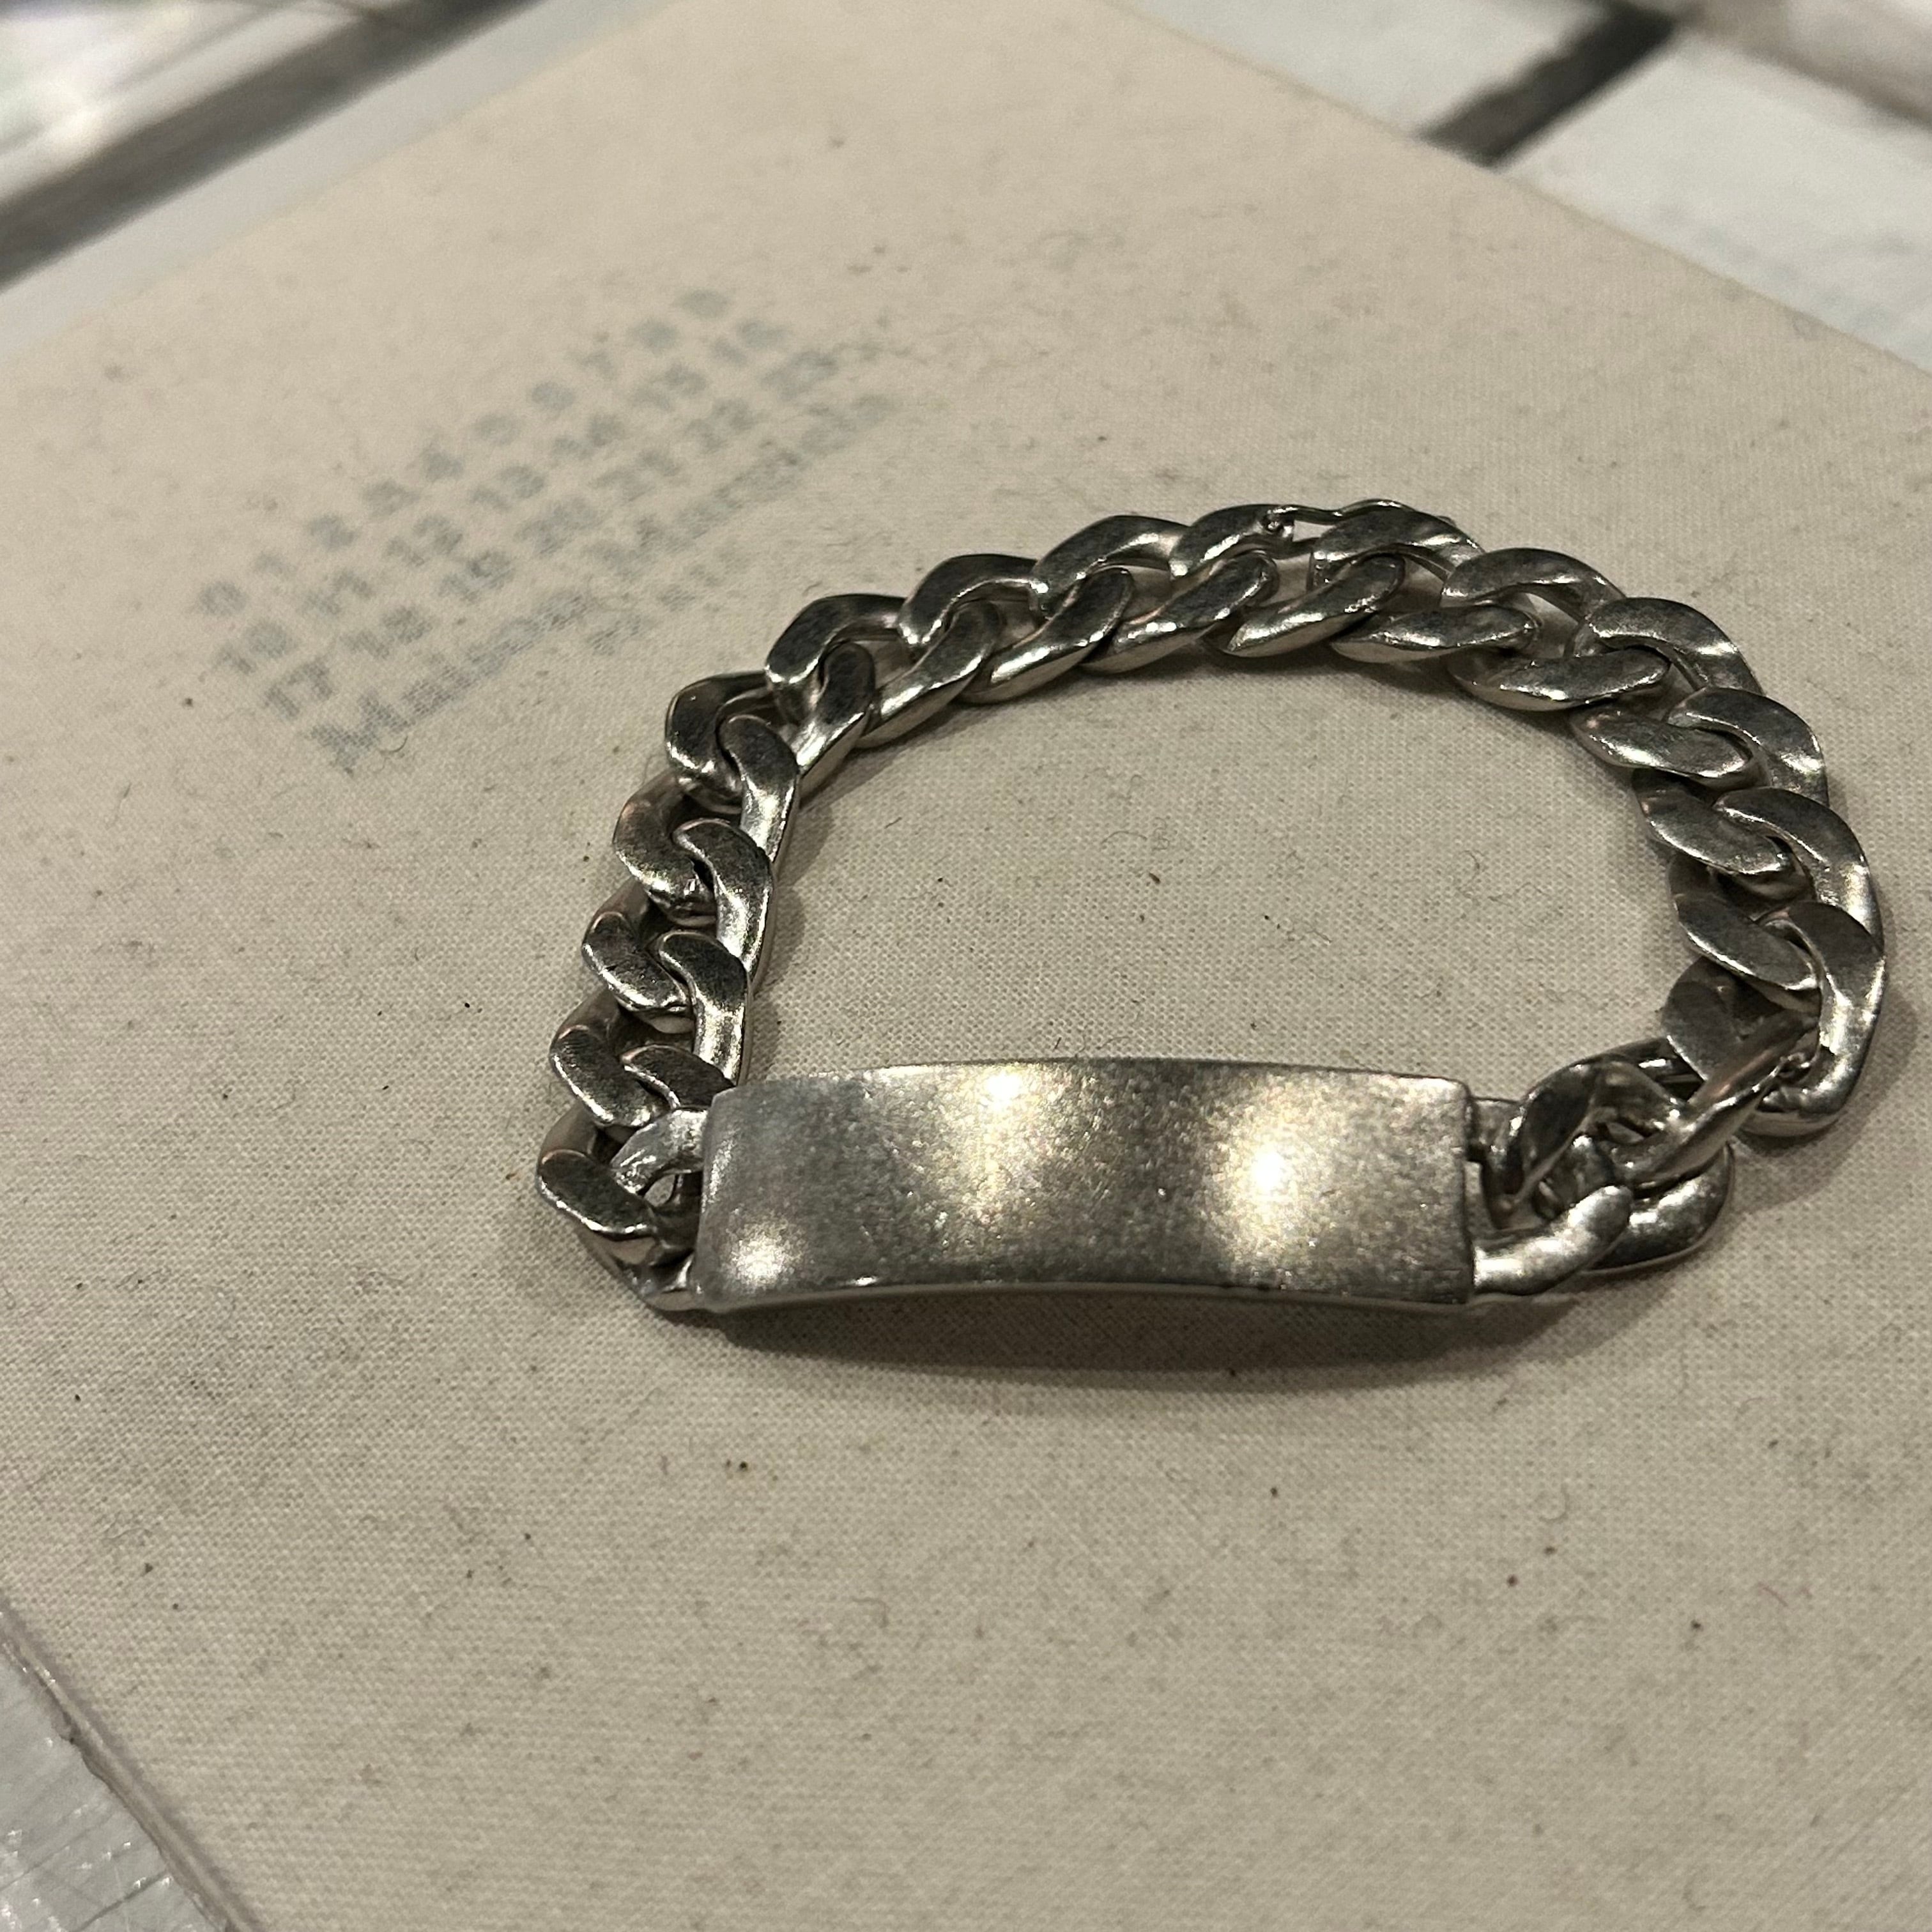 Maison Margiela【メゾン マルジェラ】ID ブレスレット(SILVER /S18UY0004 SV0130 SIZE:05 ). |  glamour online powered by BASE